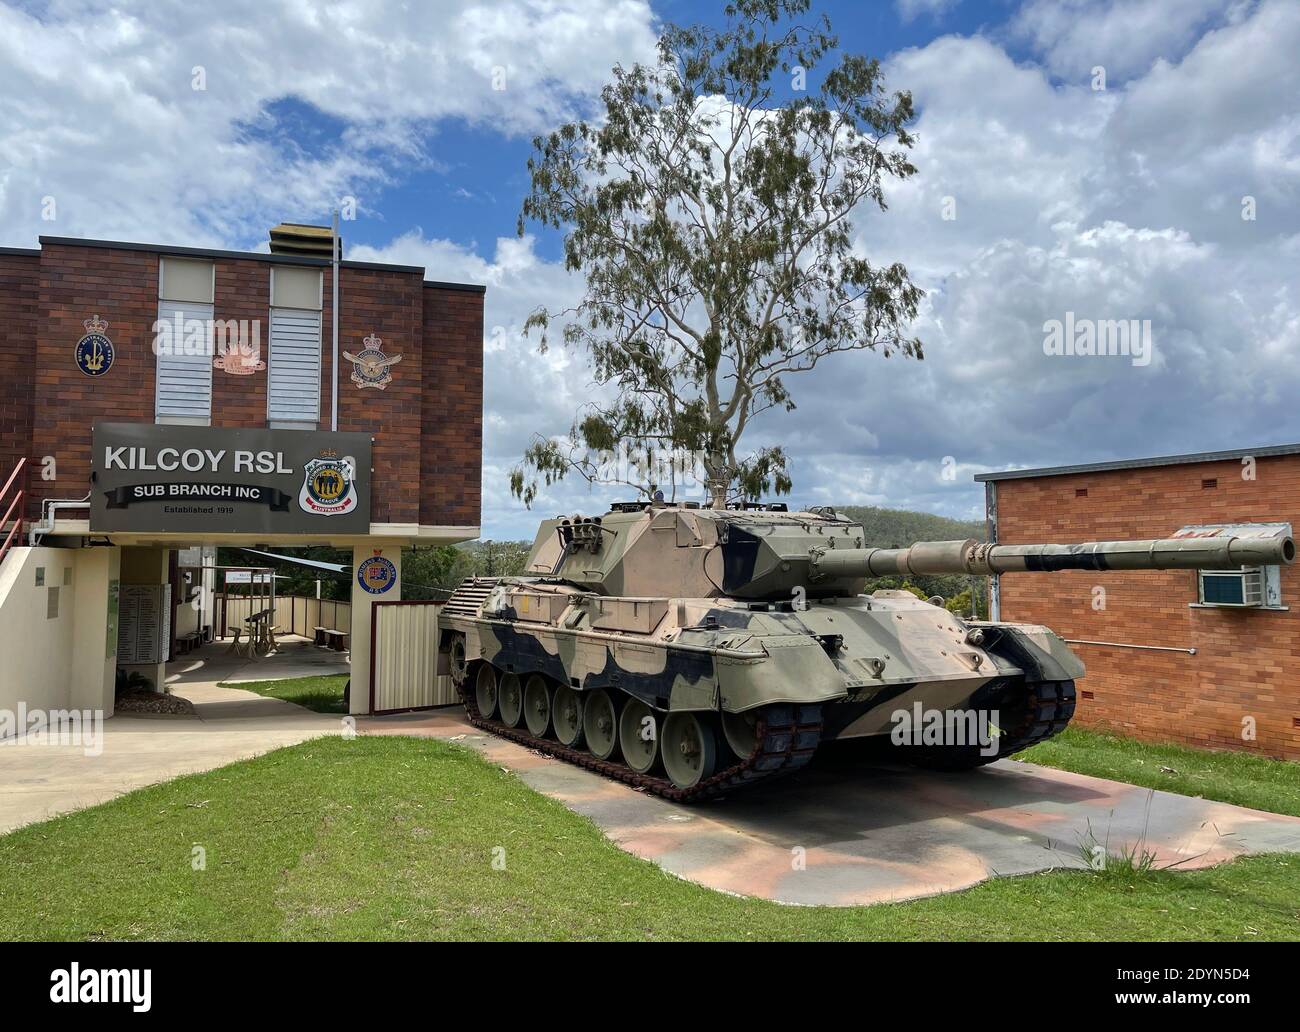 View of a military armoured vehicle, tank, in front of the RSL instalations in the rural town of Kilcoy, Queensland, Australia Stock Photo